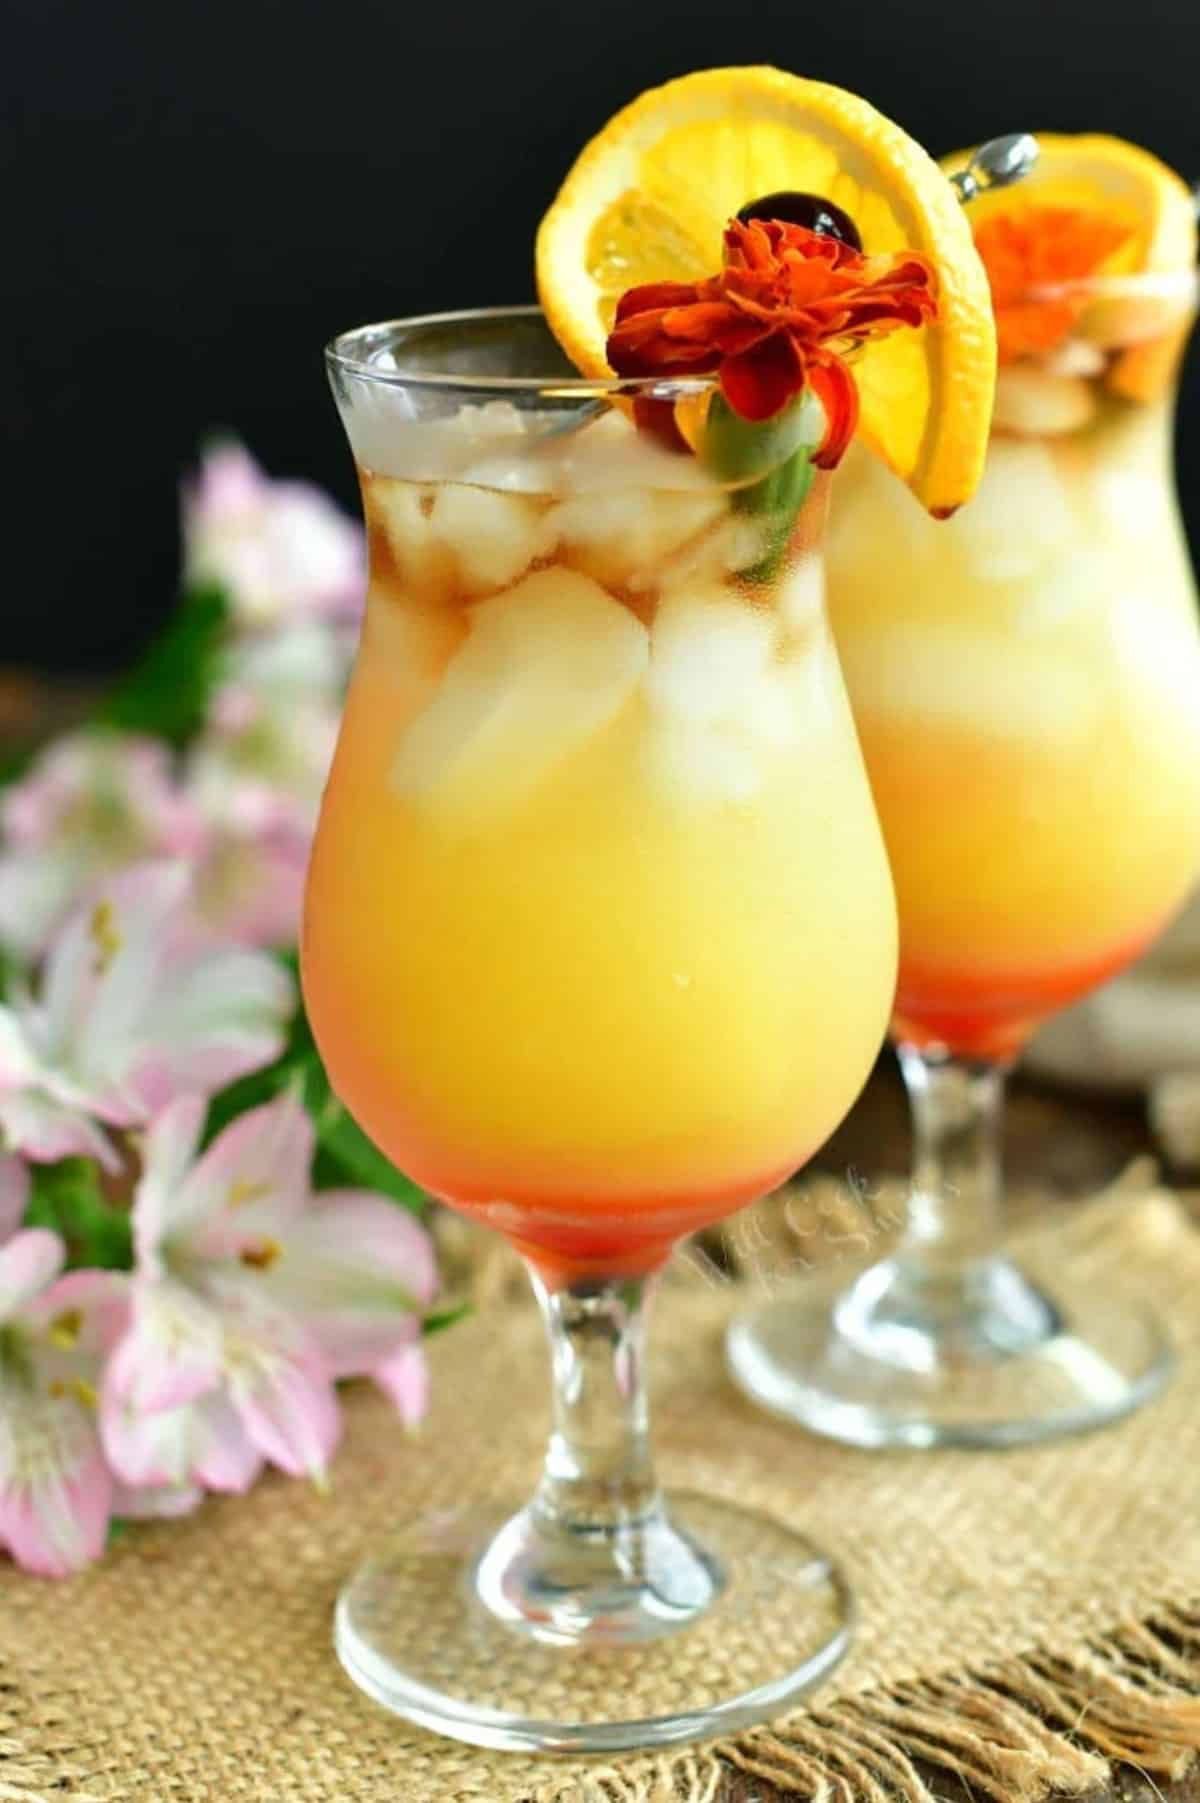 layered cocktail pink on the bottom, orange in the middle, and dark clear on top garnished with a flower and orange slide.